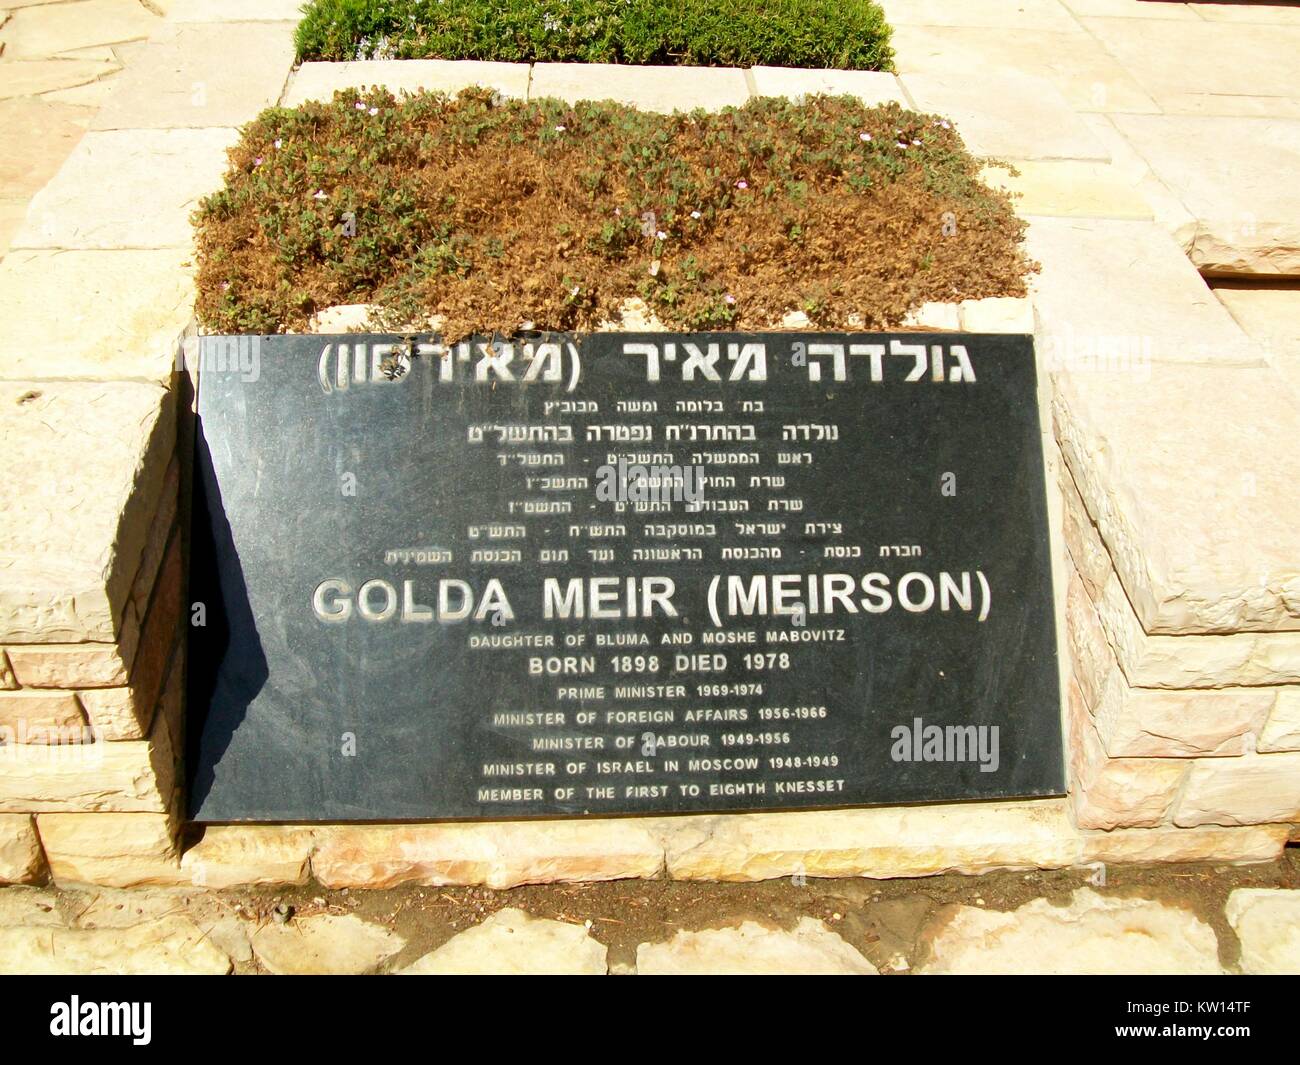 Close up of grave of former Prime Minister of Israel Golda Meir (Meirson), in Mount Herzl cemetary, Jerusalem, Israel, 2012. Stock Photo